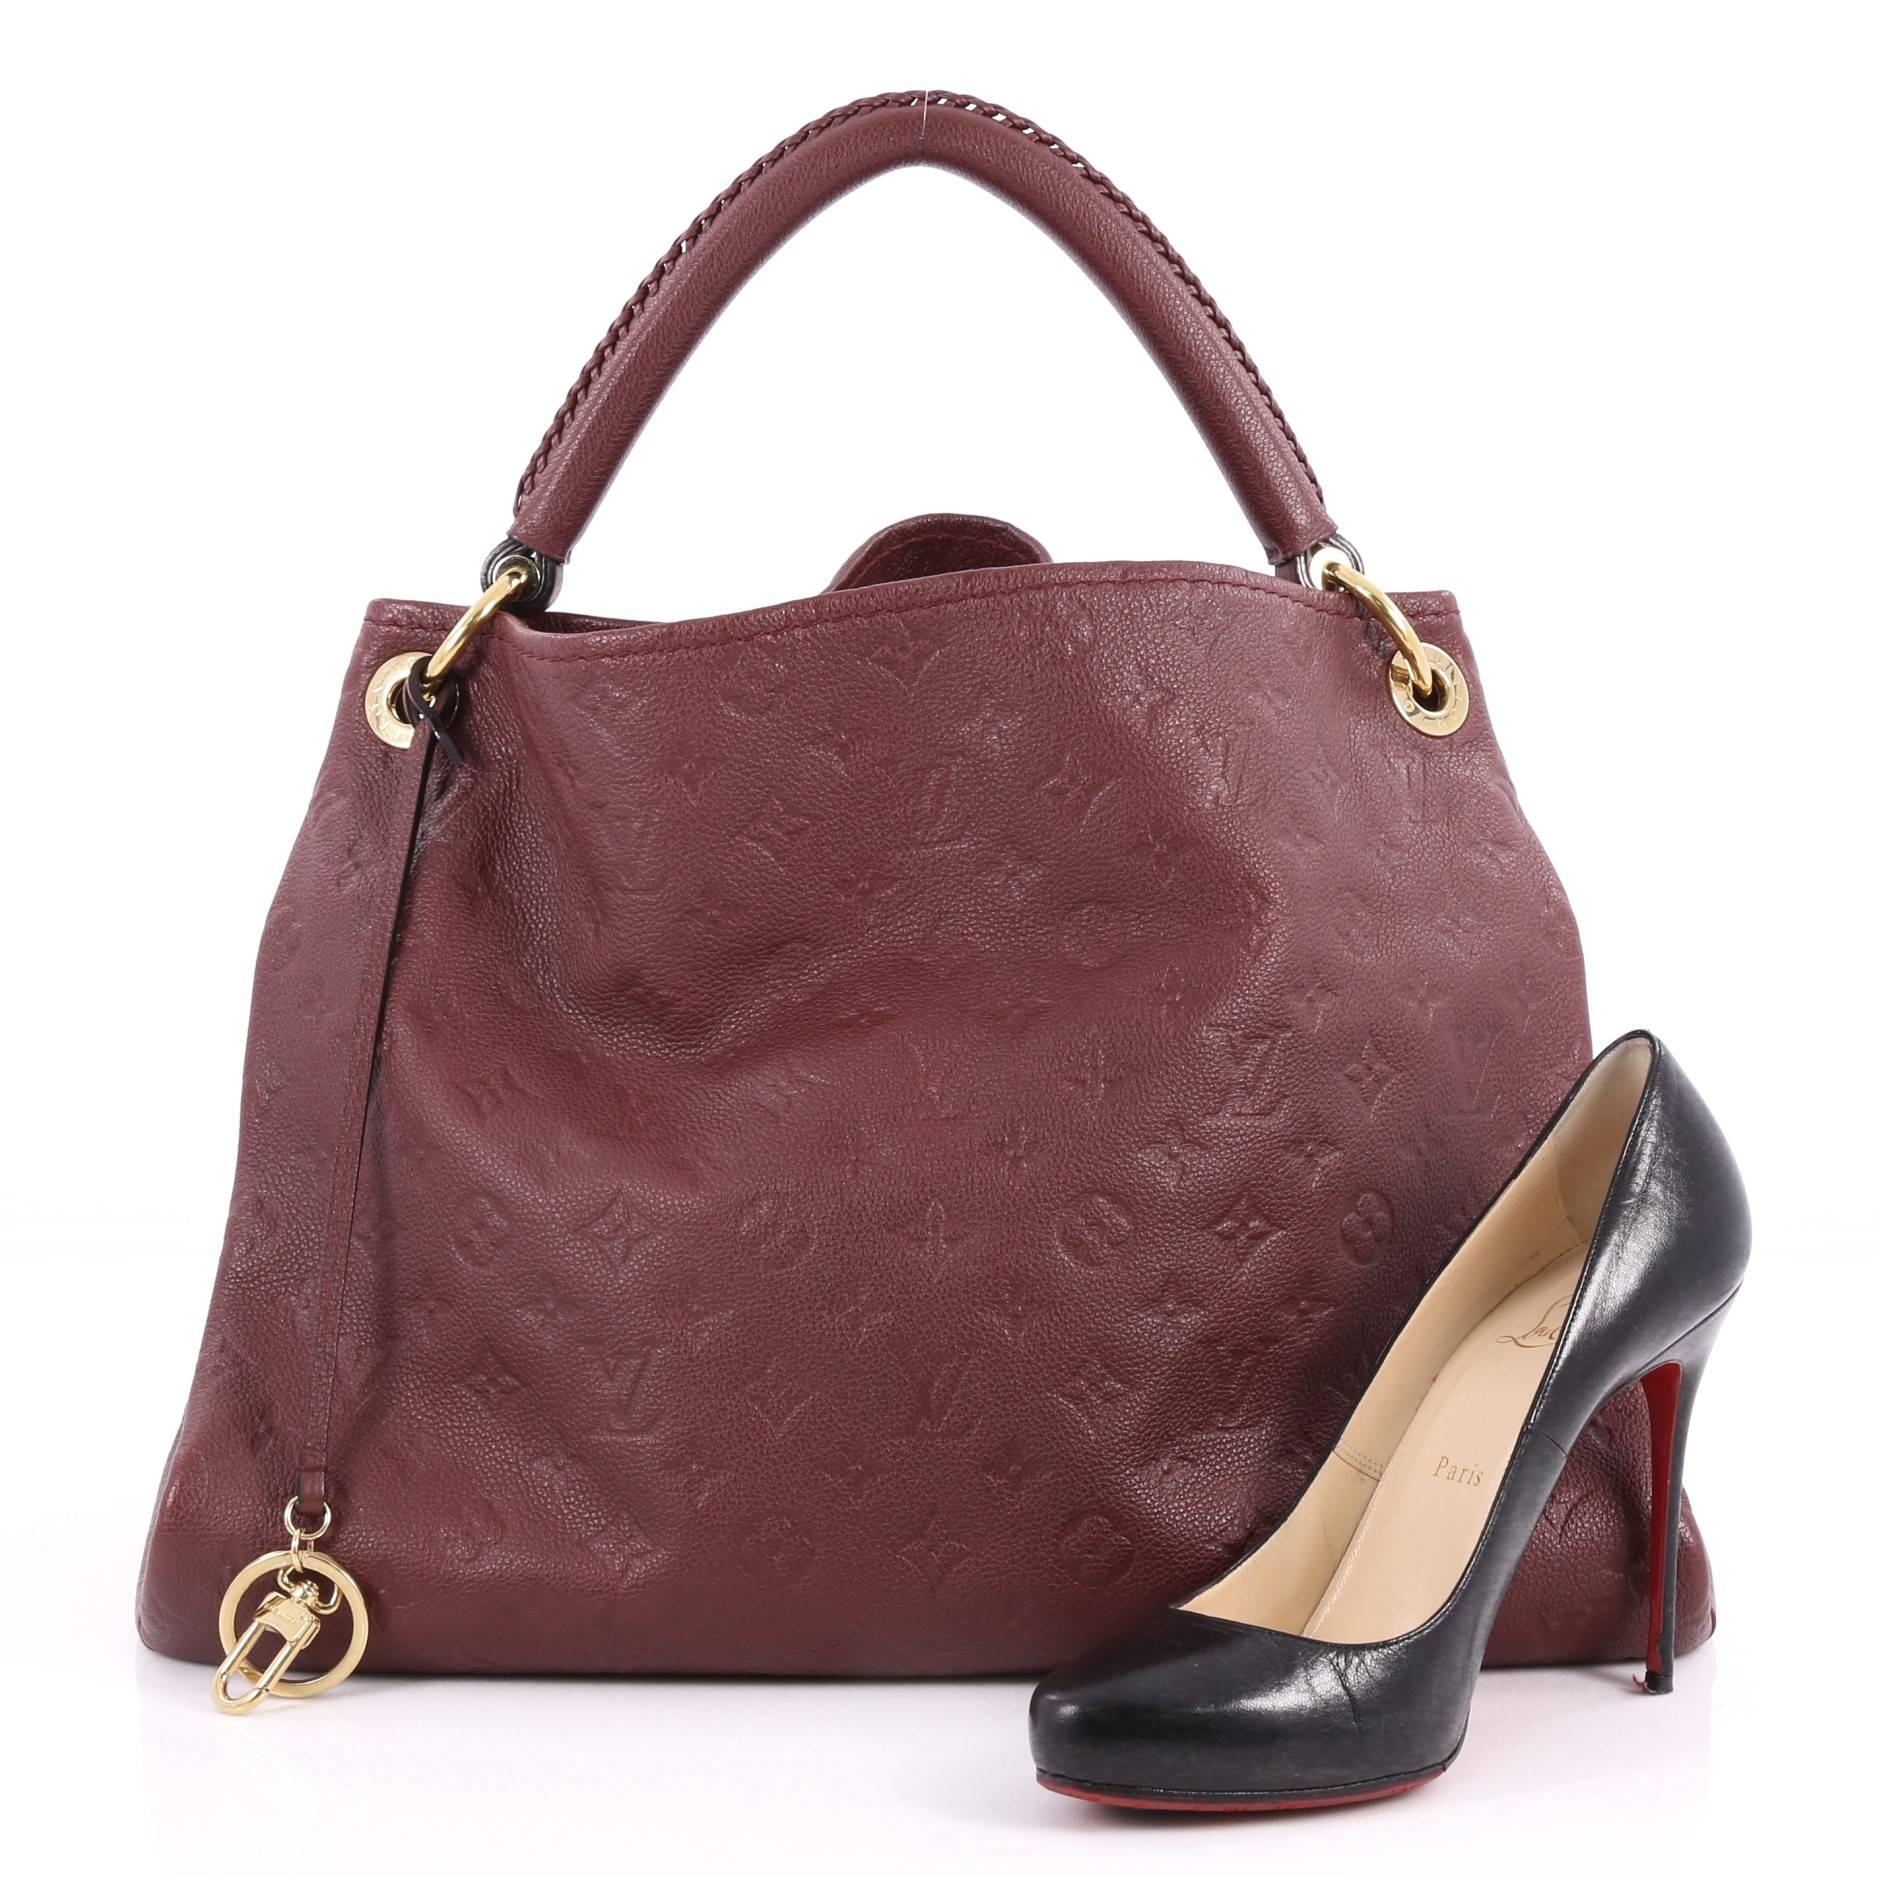 This authentic Louis Vuitton Artsy Handbag Monogram Empreinte Leather MM is an iconic hobo. Crafted from burgundy monogram embossed empreinte leather, this luxurious and refined hobo features a single looped braided top handle with polished gold